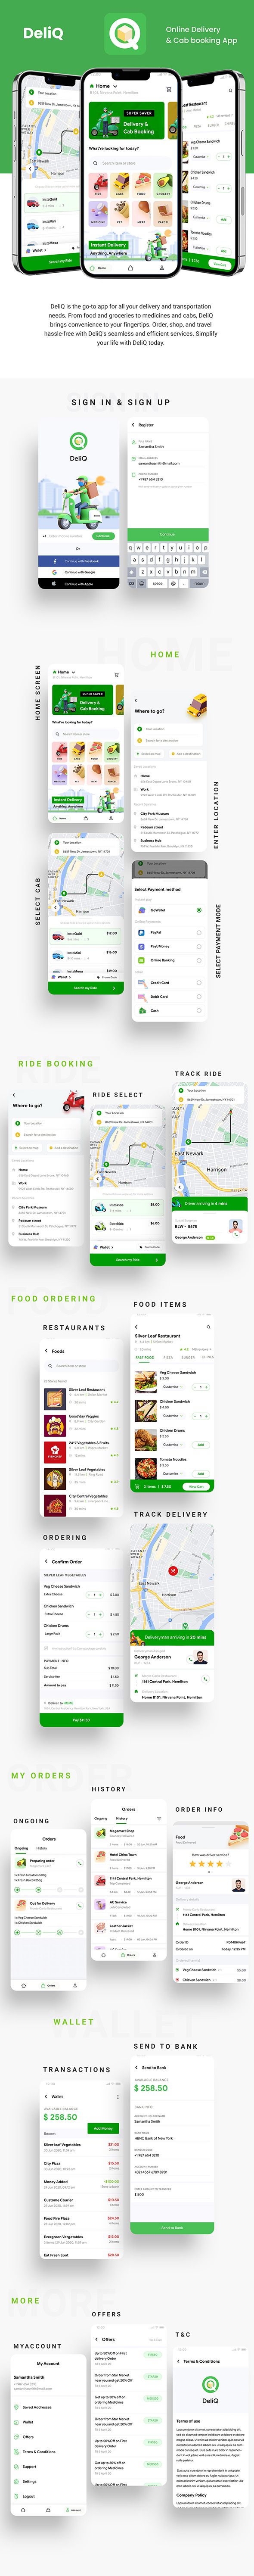 6 App Template| eCommerce Food Grocery Delivery App| Cab Booking| Peer 2 Peer Delivery App| DeliQ - 3